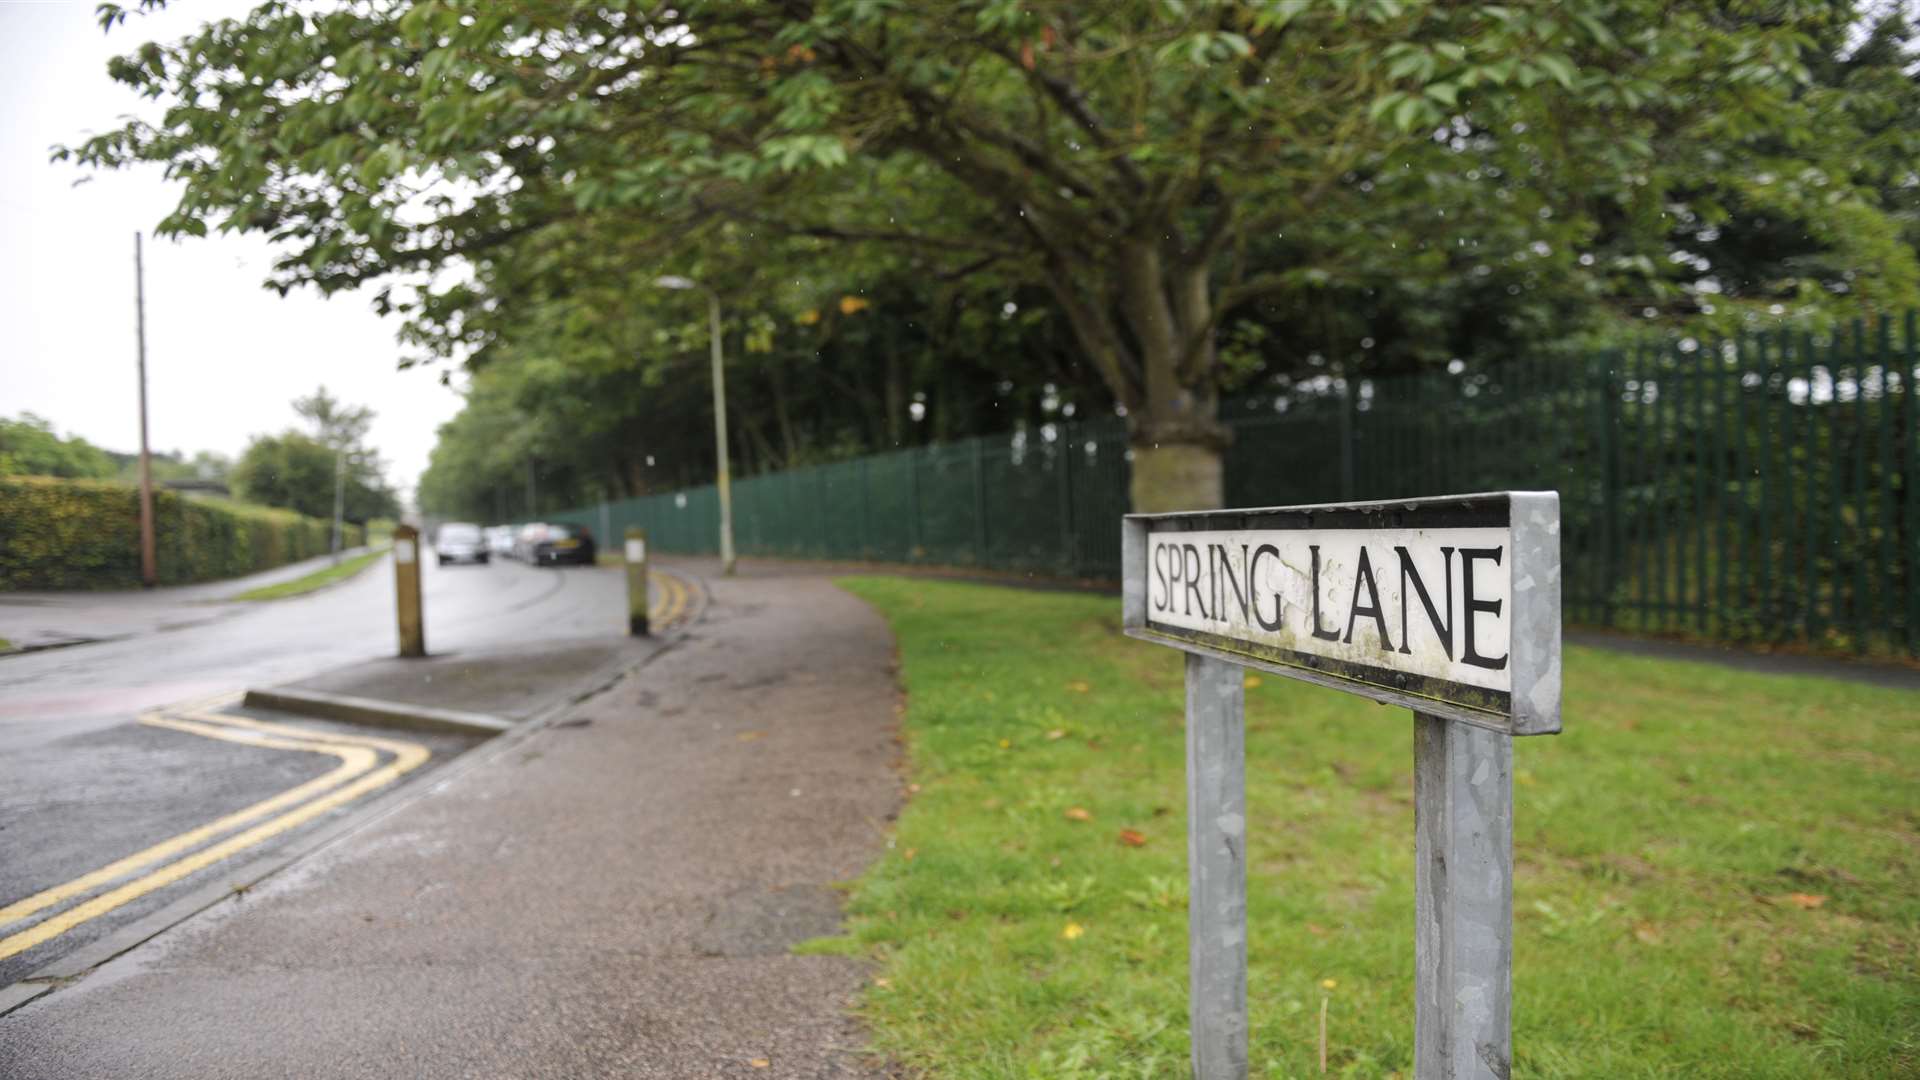 Spring Lane estate in Canterbury which is being plagued by drug dealers